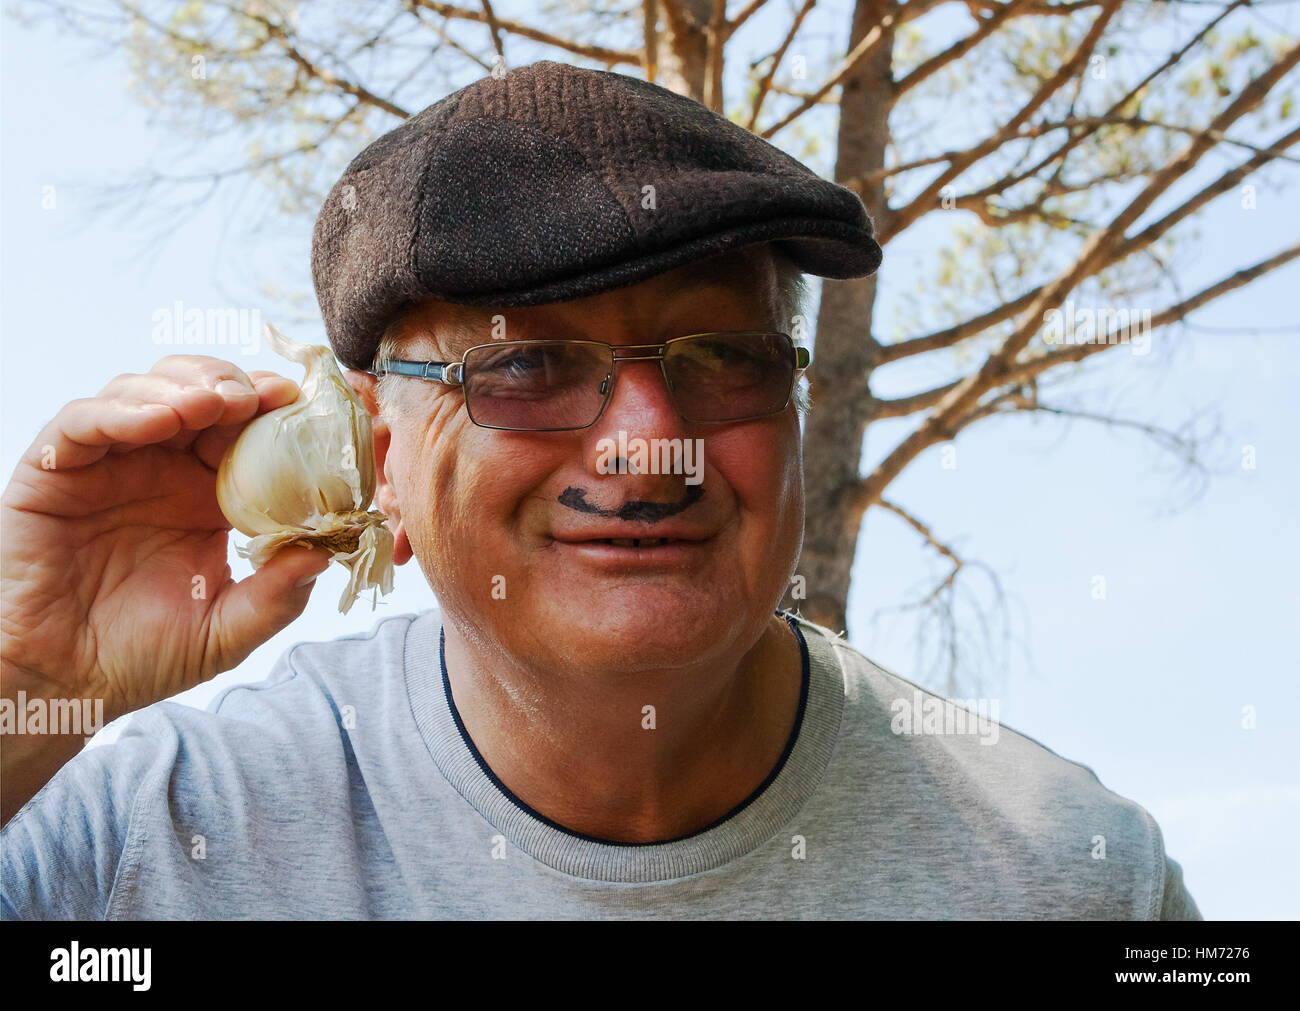 An elderly man mimicking a Frenchman with his cap, mustache, garlic and his own silly grin. Stock Photo